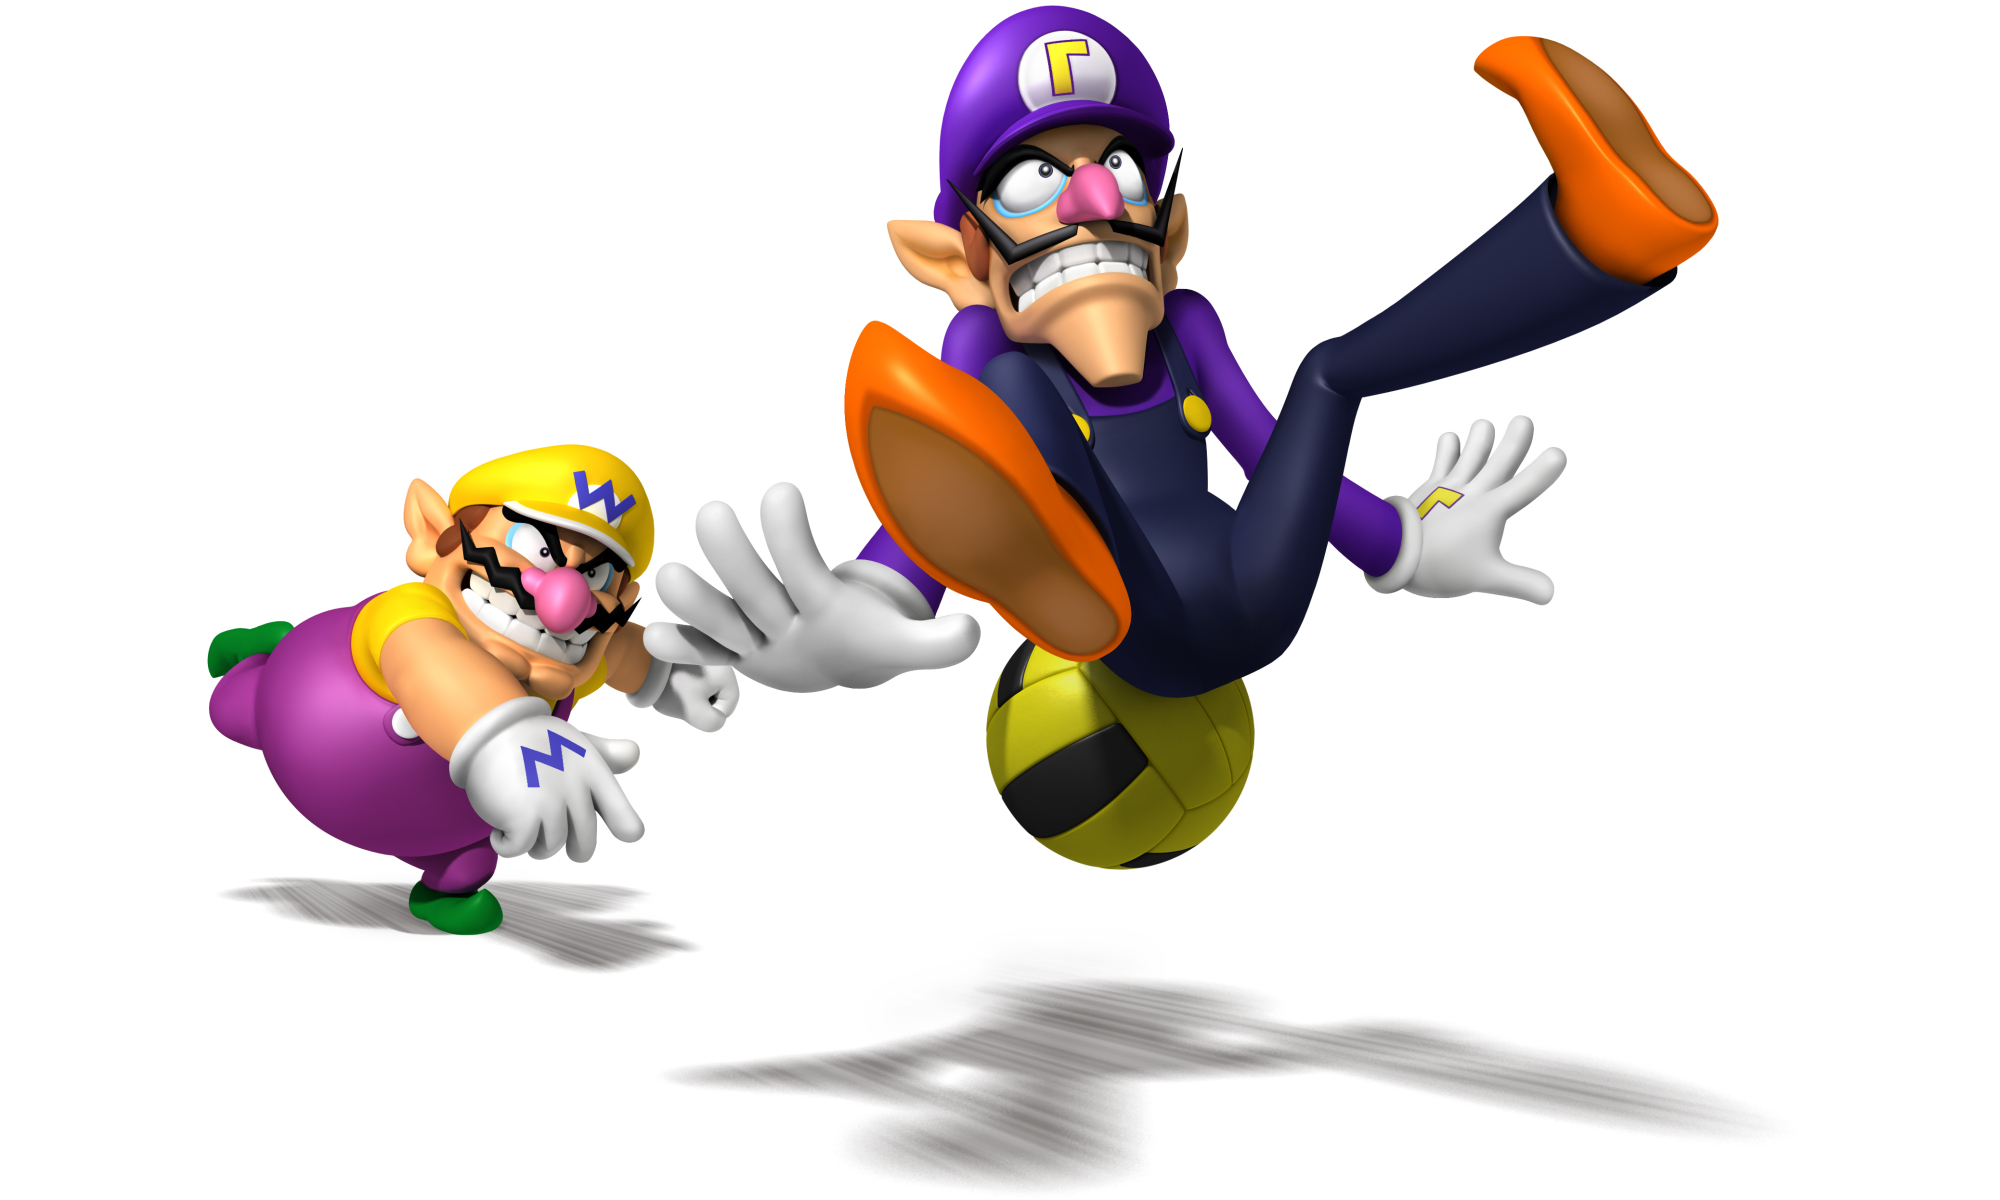 Insane Facts About Wario - He’s German